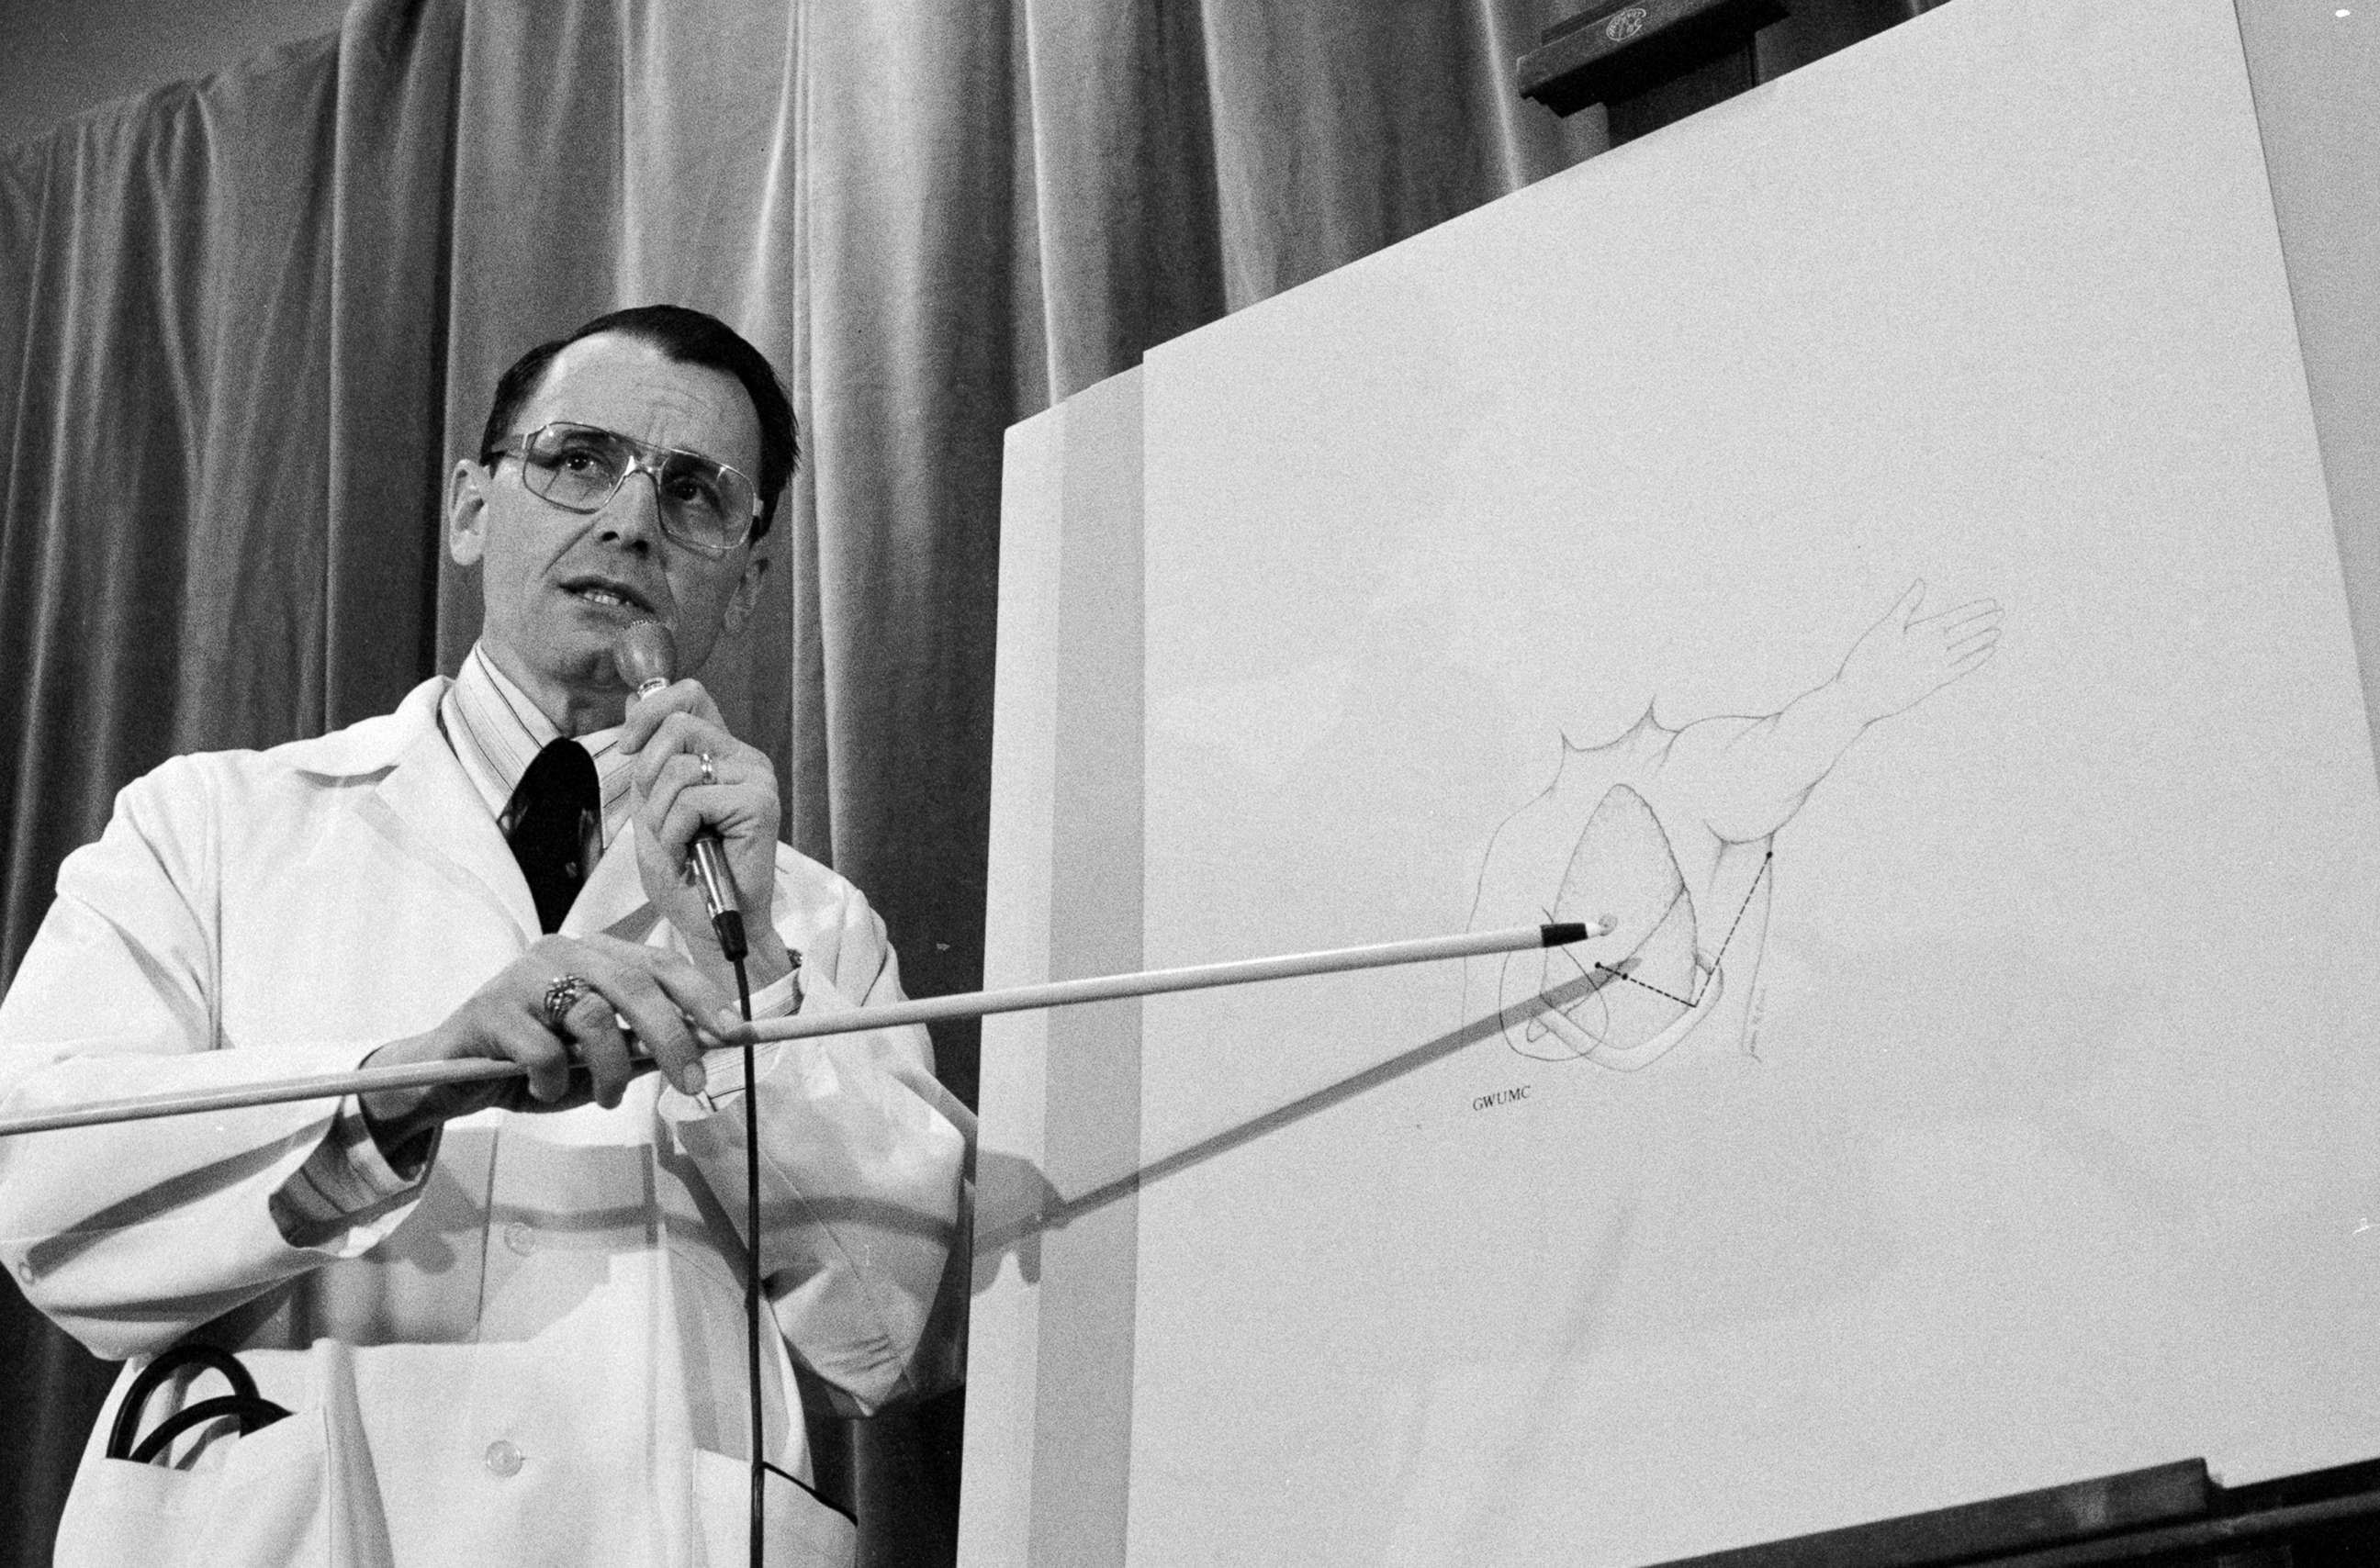 PHOTO: Dr. Benjamin Aaron, who performed surgery on President Reagan's gunshot wounds, shows on a chart the trajectory of the bullet that entered Reagan's lung in Washington, March 30, 1981.